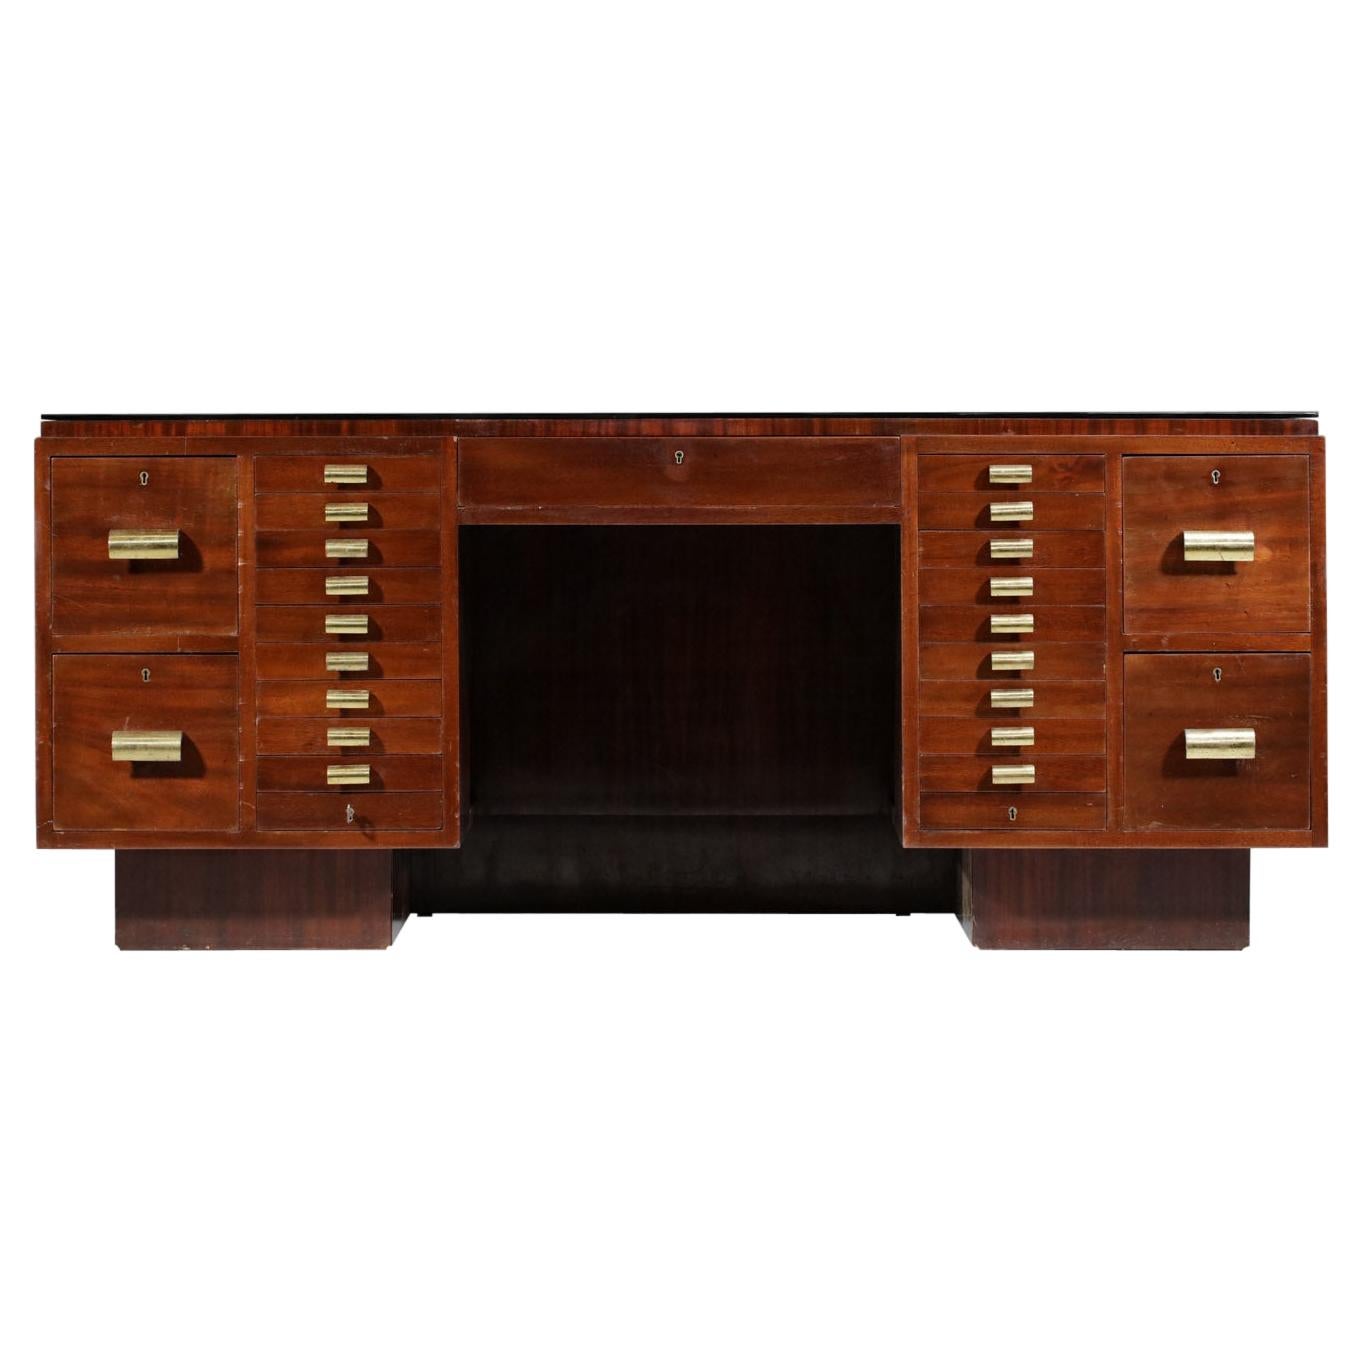 Imposing 1940's French Modernist Desk in Mahogany in Style of Dupré Lafon, E498